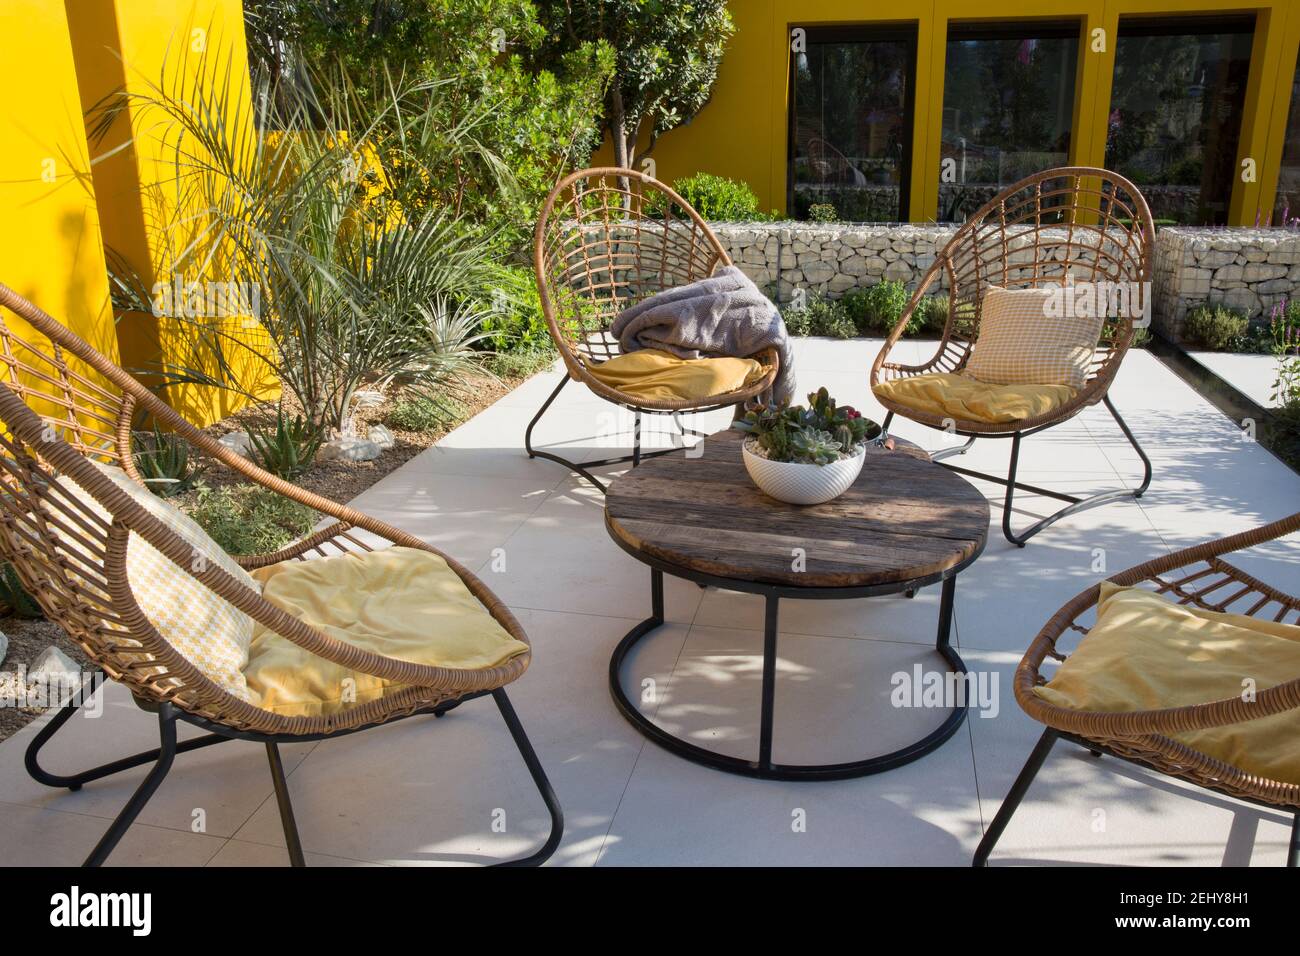 working from home garden office studio Mediterranean climate garden modern grey paved stone paving patio rattan garden furniture table chairs UK Stock Photo